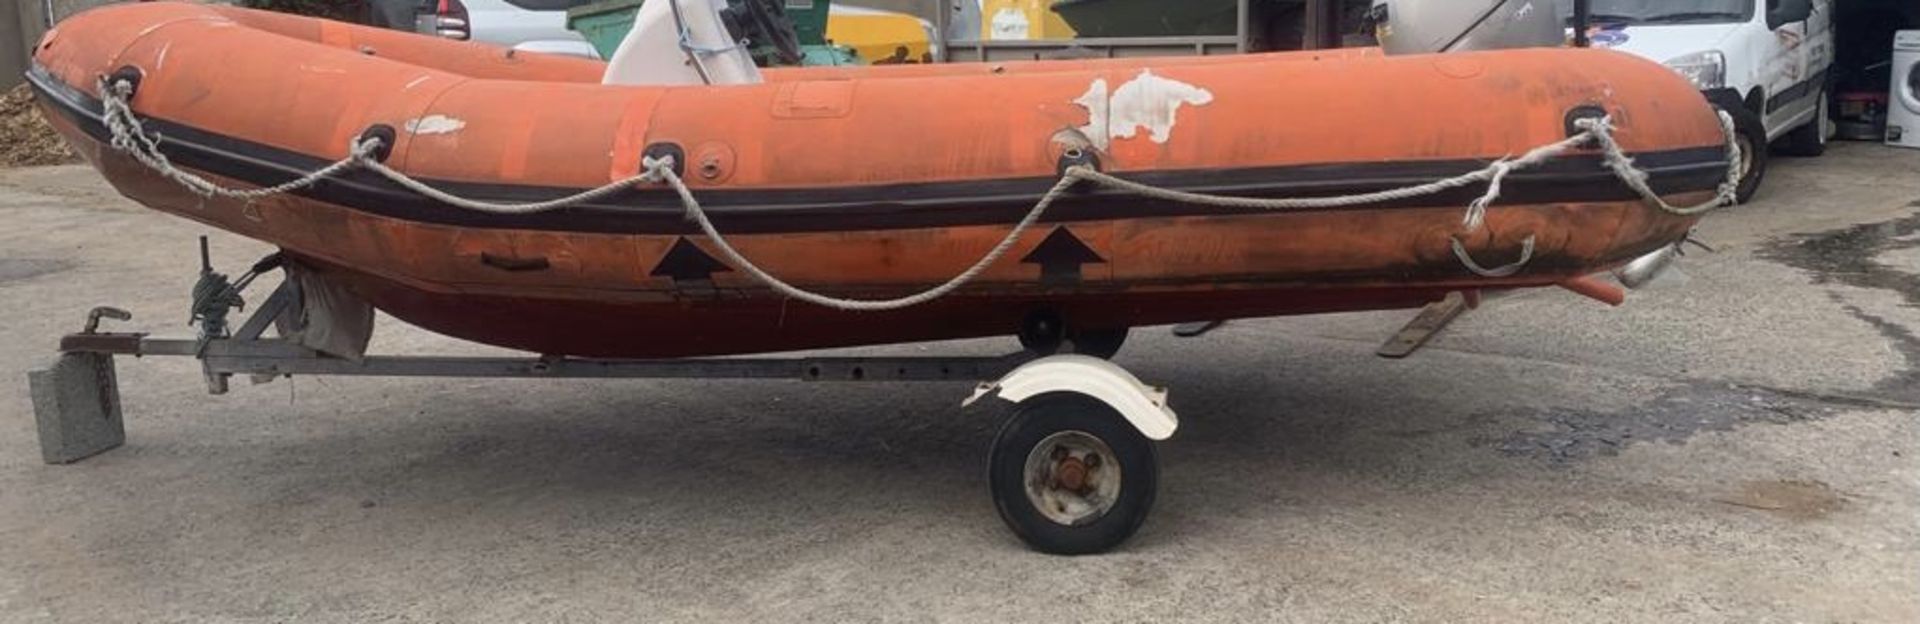 DUNLOP FAST RESCUE 14 FEET RIBBED BOAT HONDA 20HP ENGINE LOCATION N IRELAND - Image 2 of 8